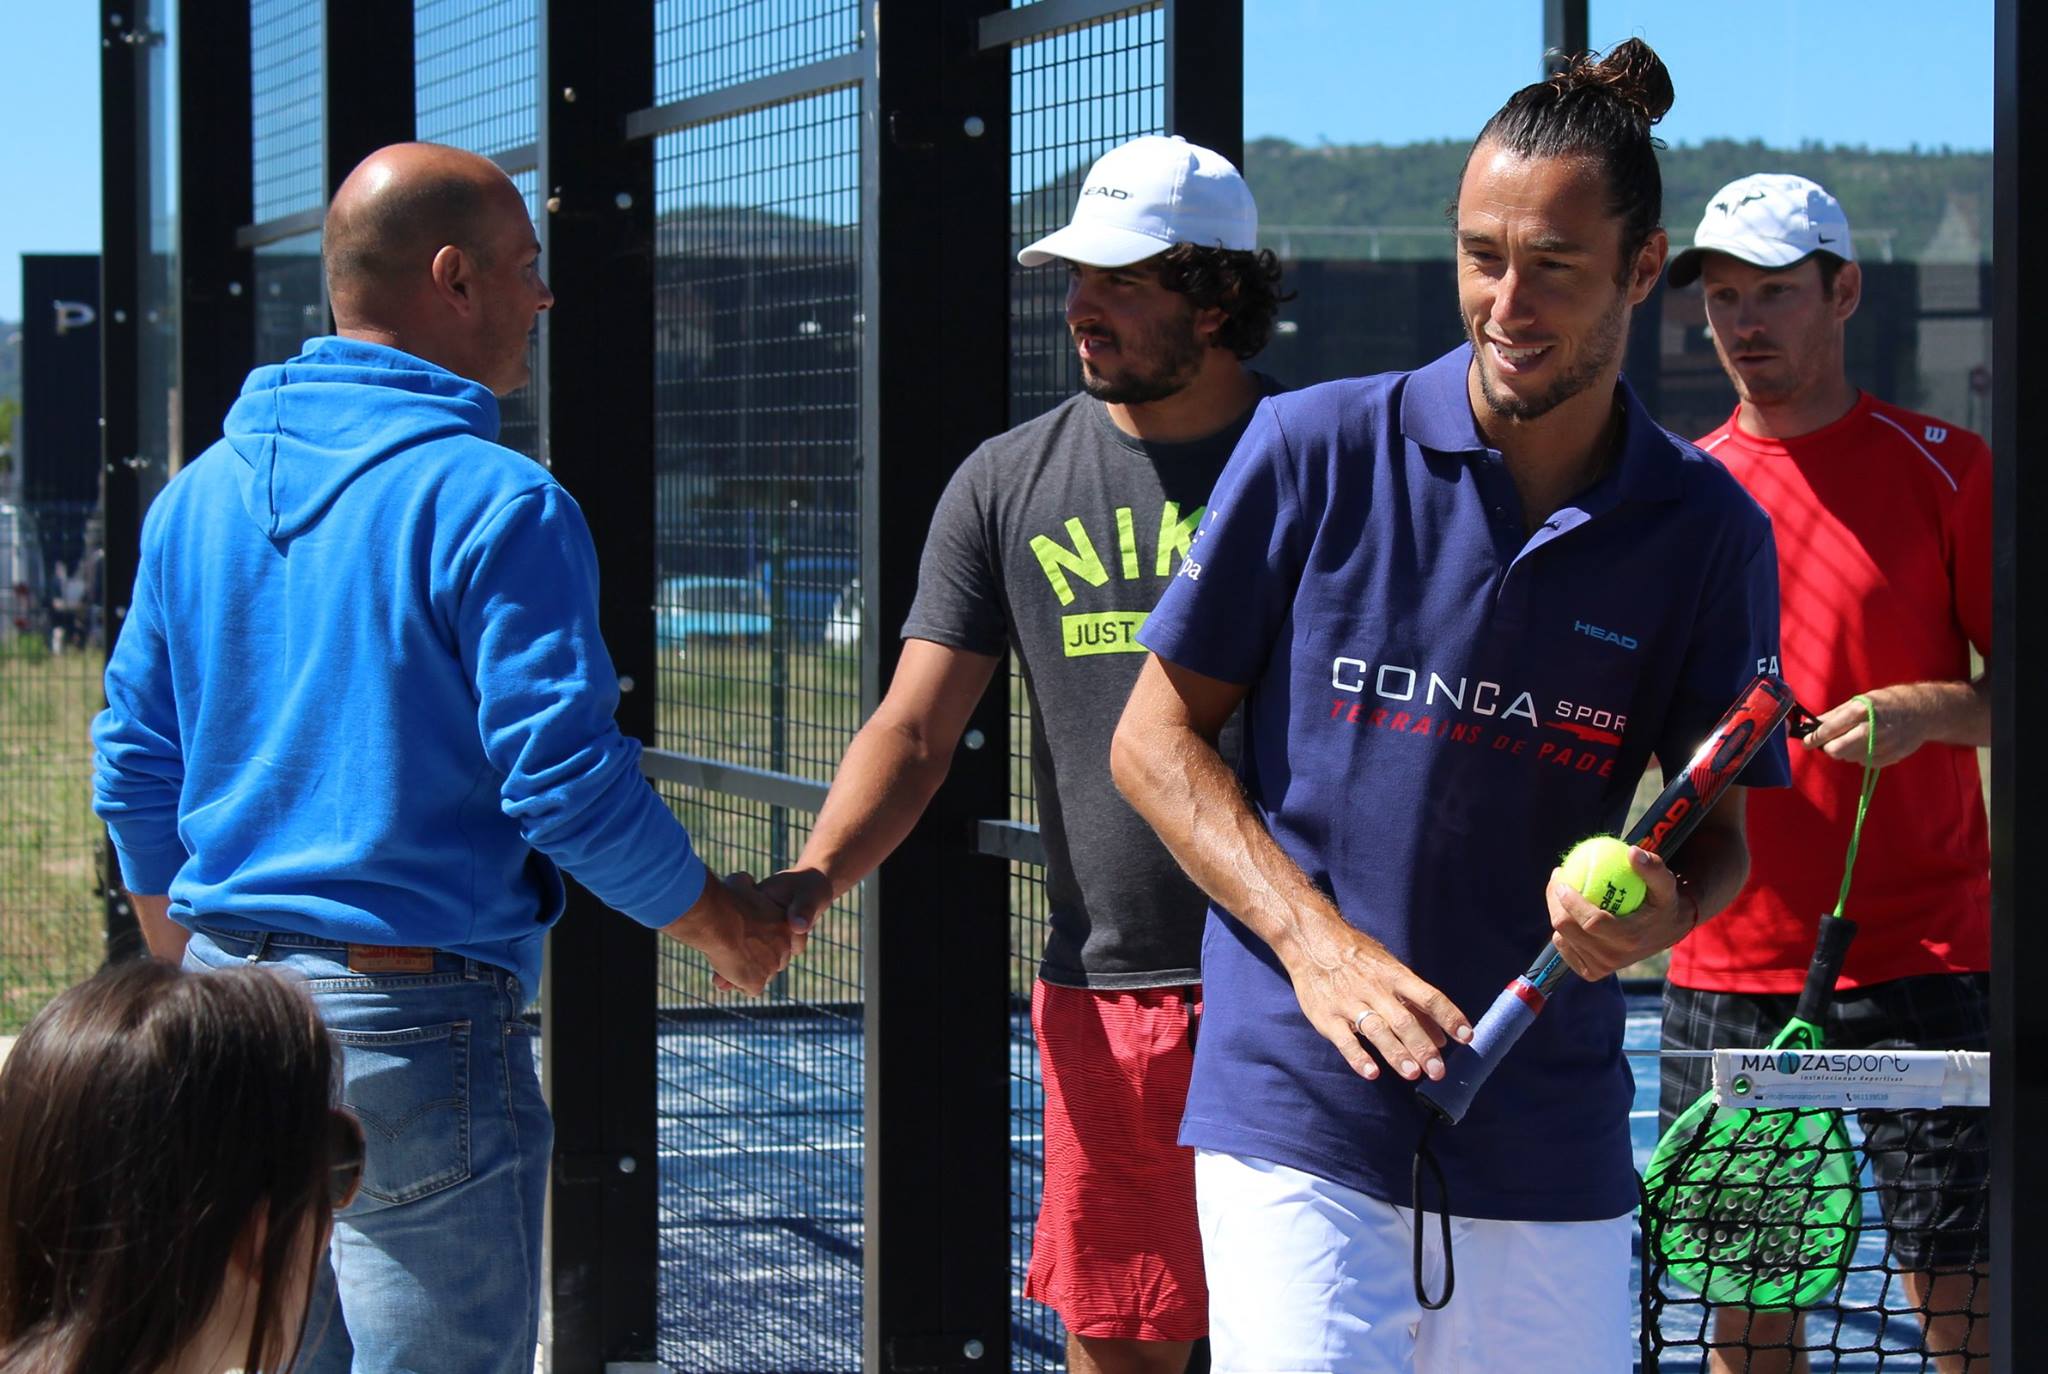 Association Sportive Tennis Le Luc thoroughly padel !